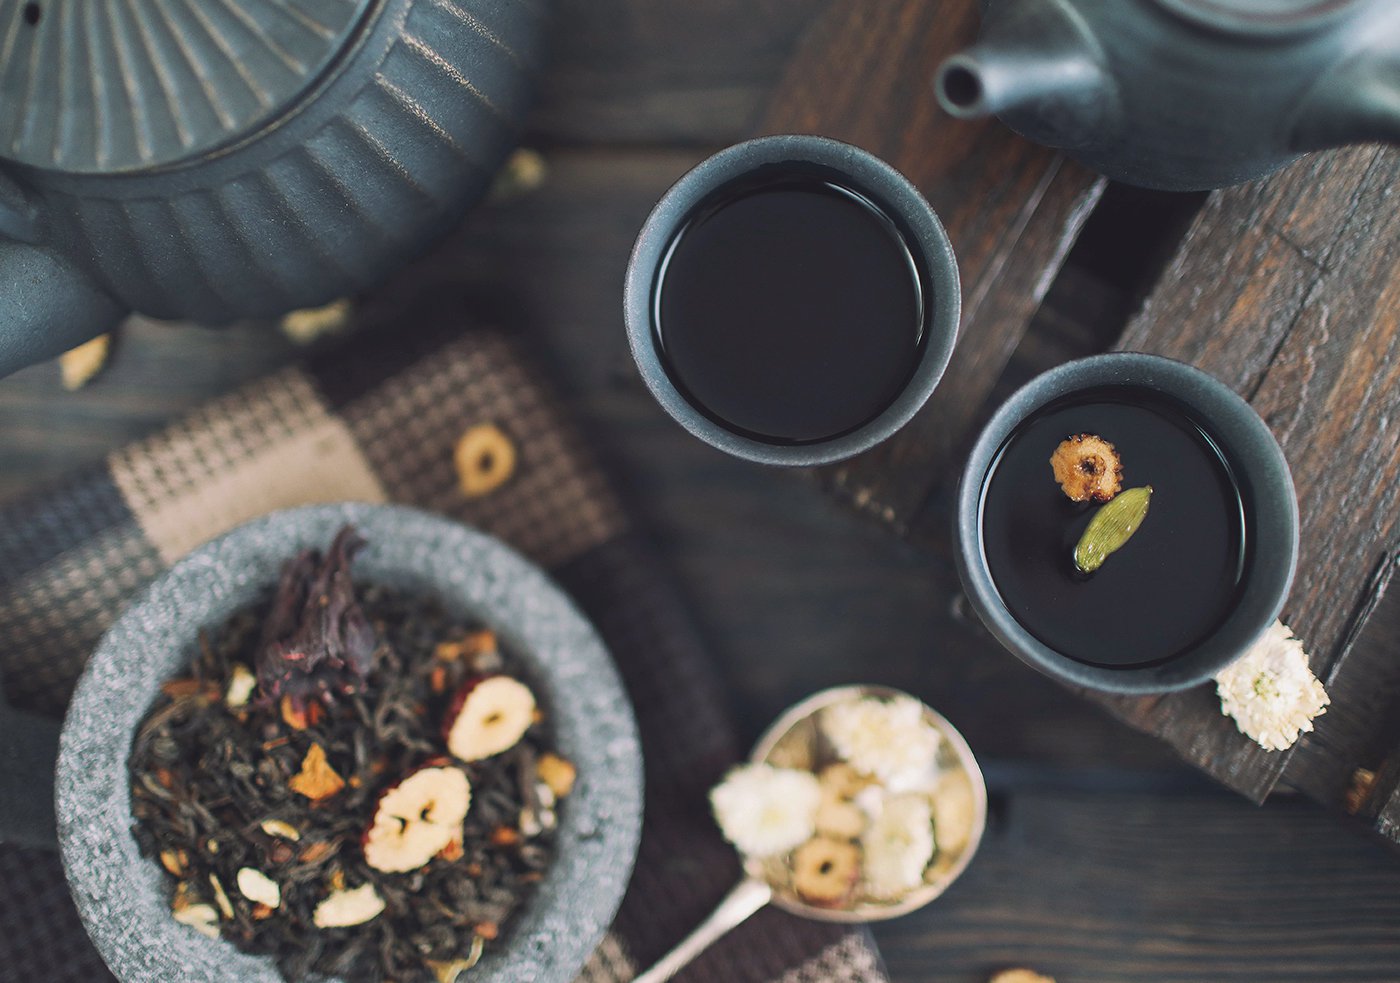 Traditions of the coffee ceremony